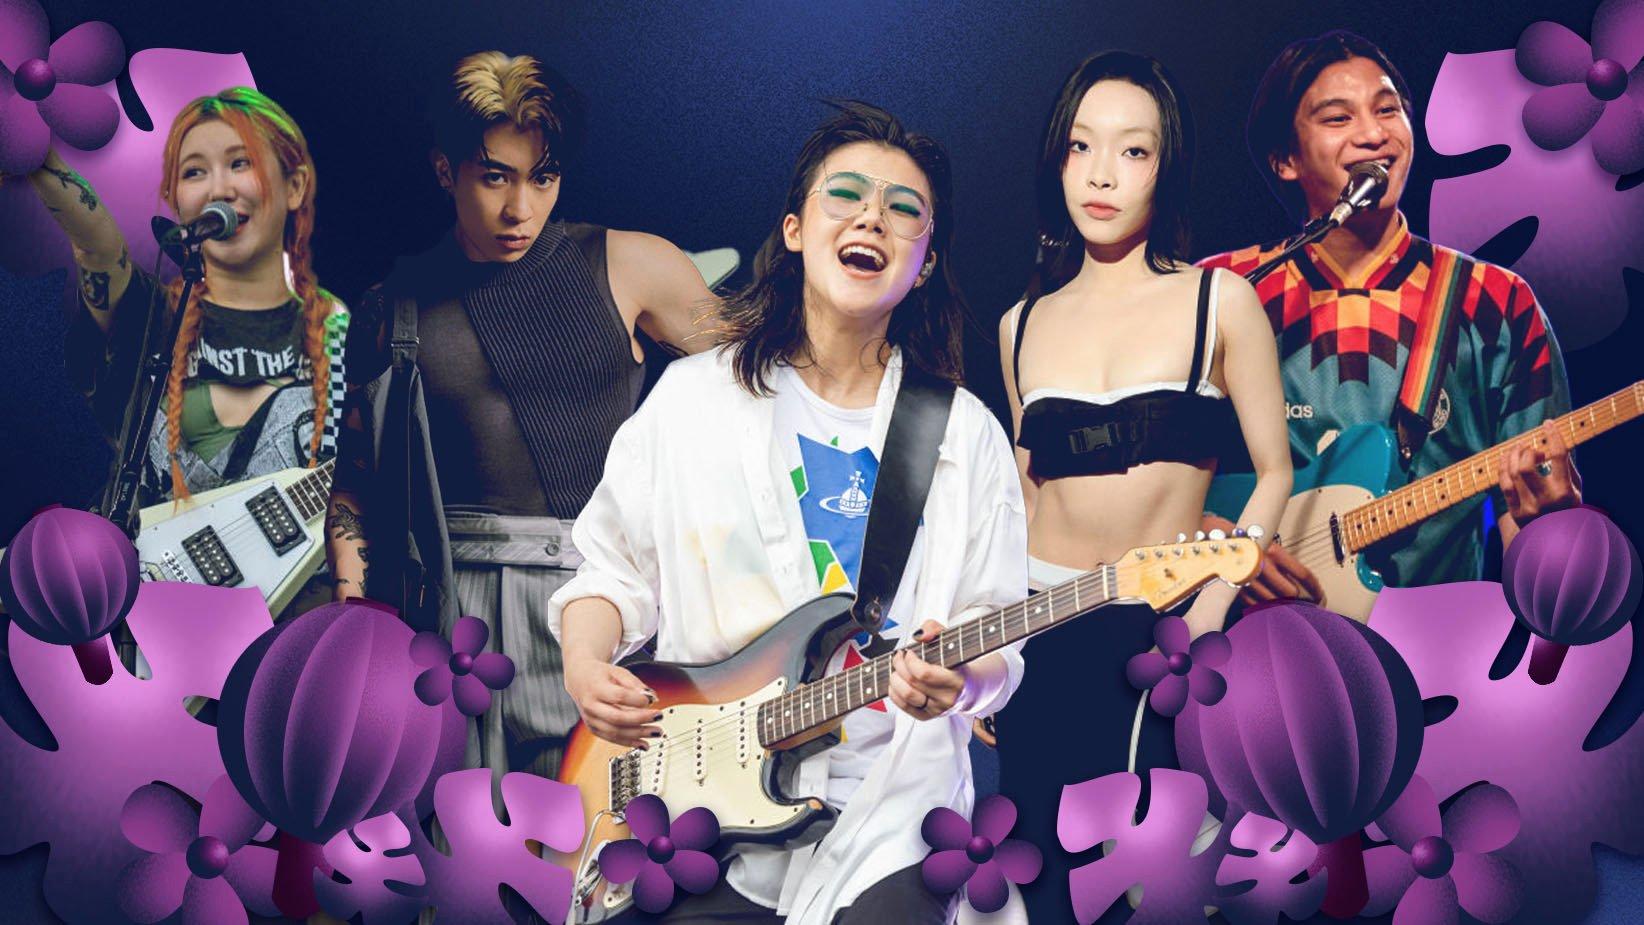 Get To Know The Many Sounds Of Asian Pop From The Philippines BGYO To Hong Kongs Tyson Yoshi and Thai Singer Phum Viphurit GRAMMY picture